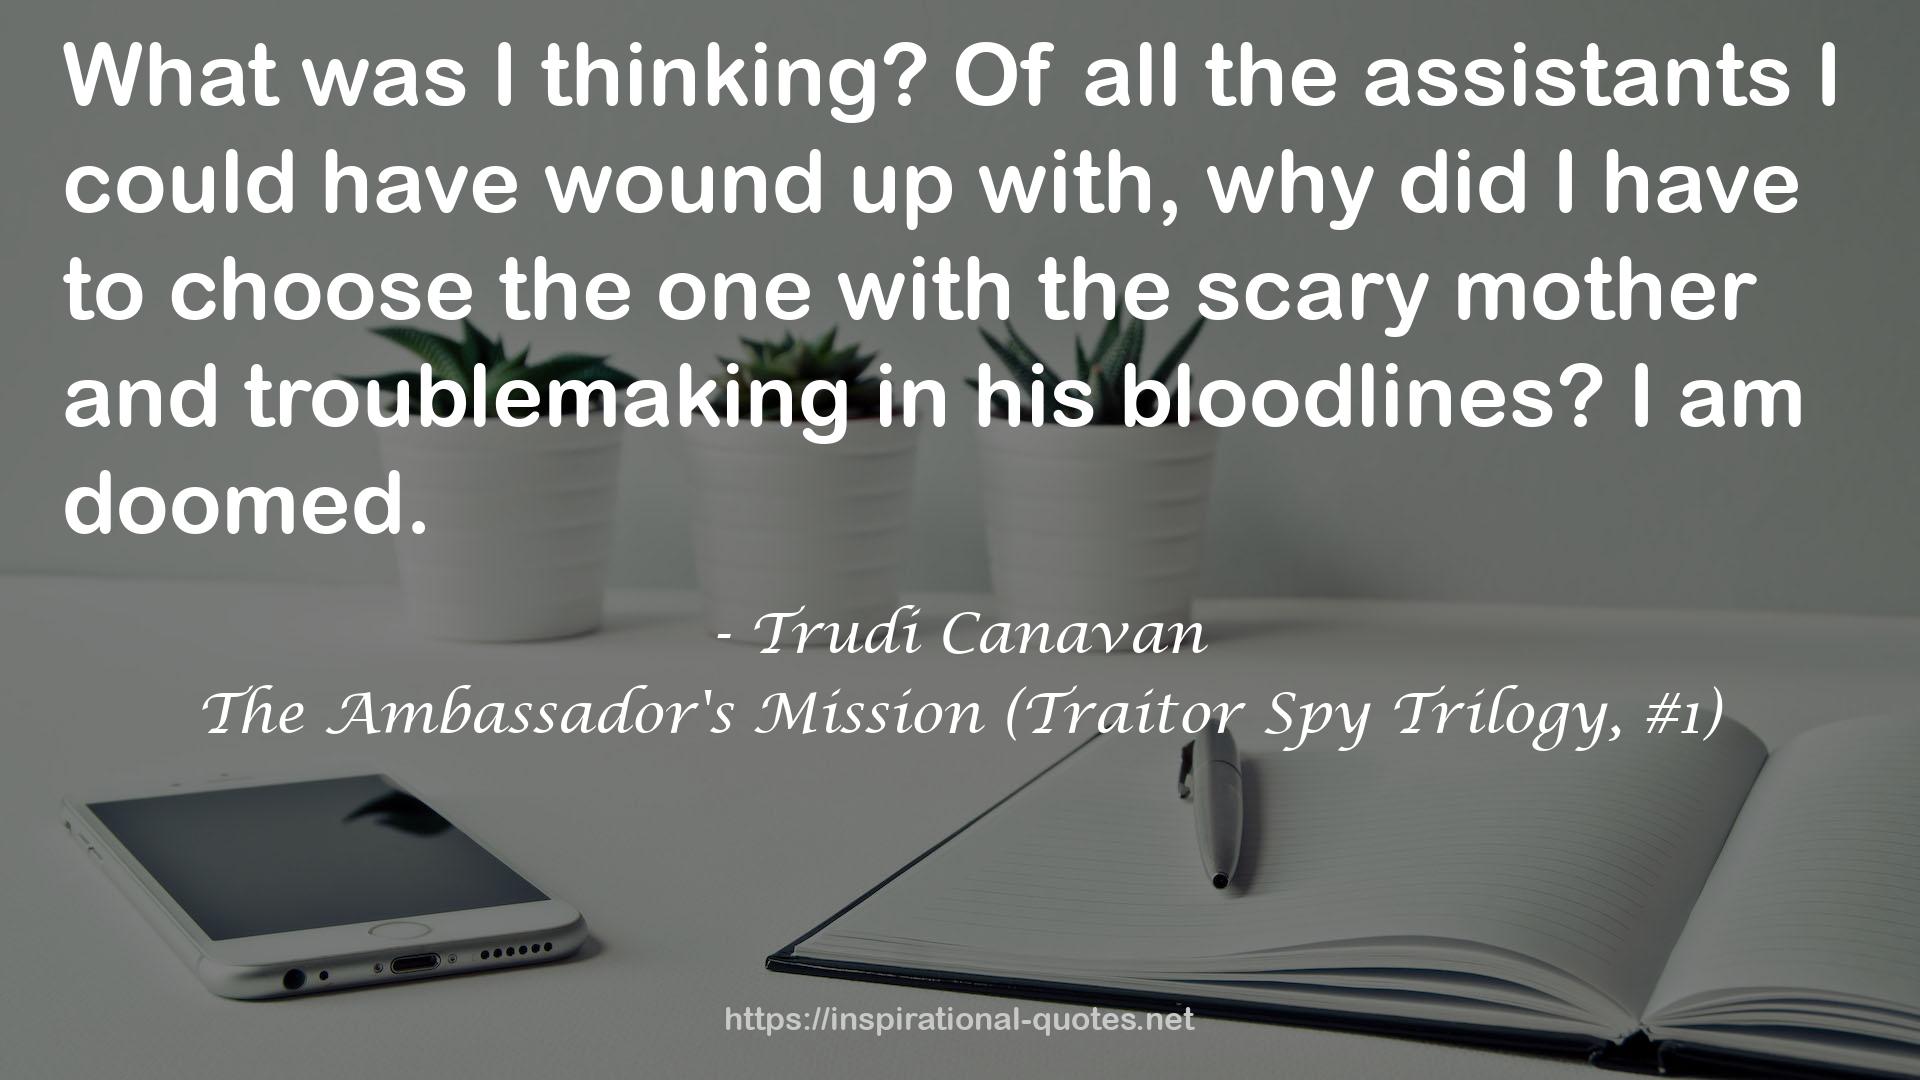 The Ambassador's Mission (Traitor Spy Trilogy, #1) QUOTES